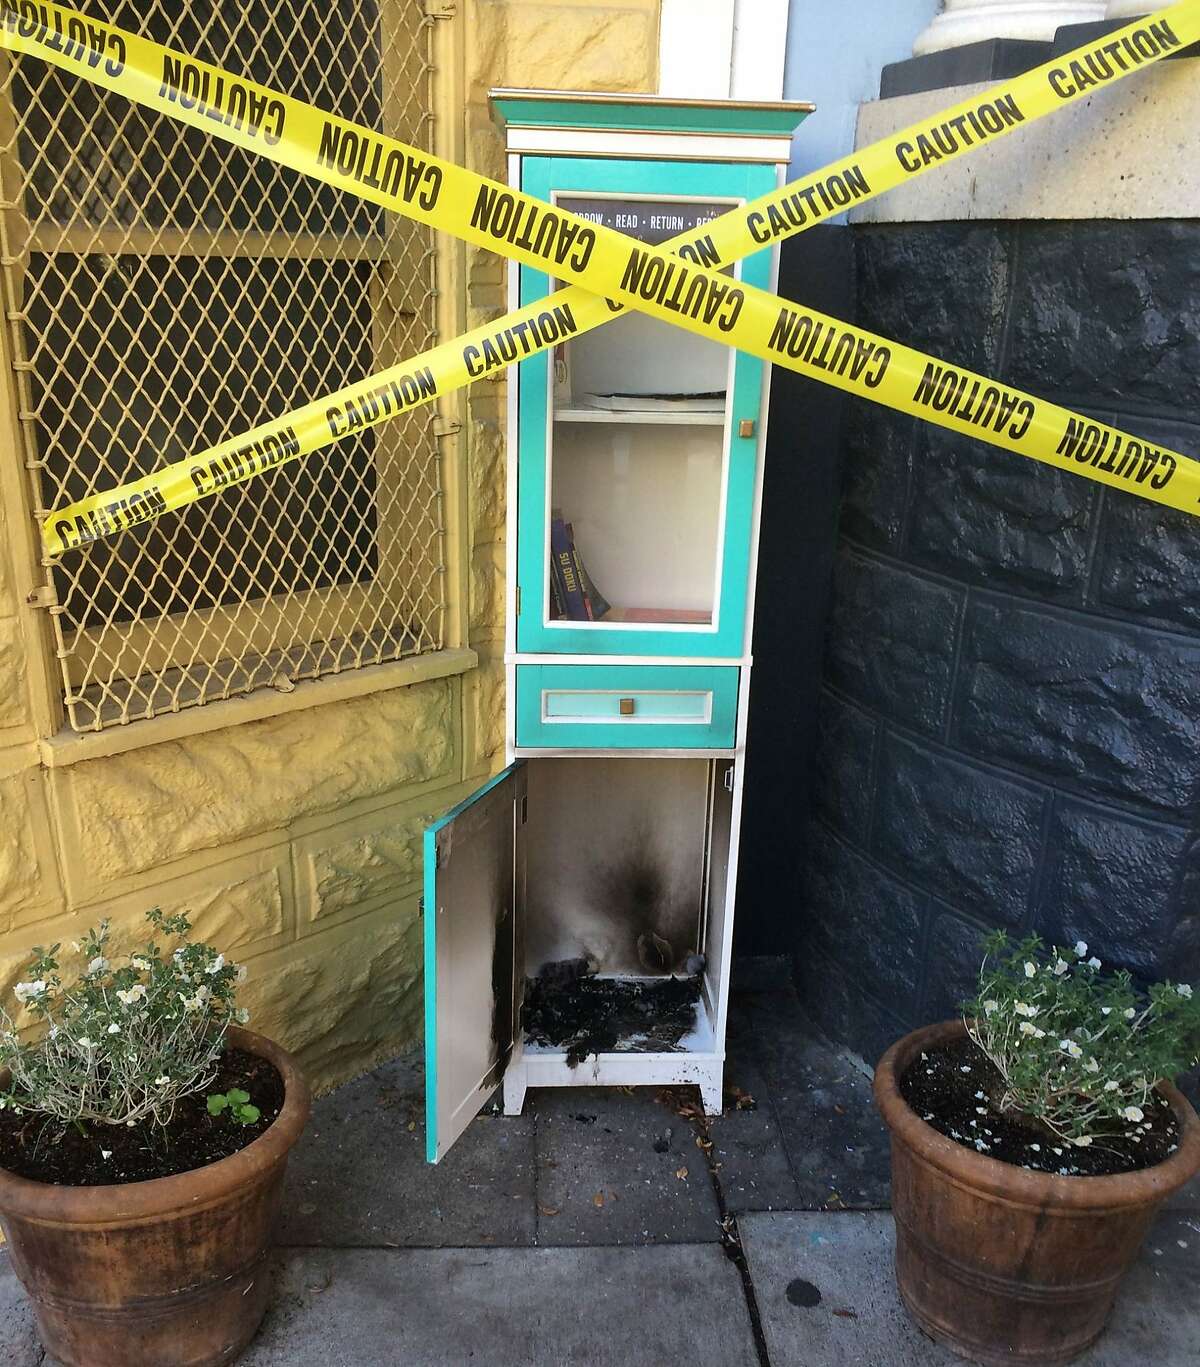 The Noe Street LFL (Little Free Library) is seen after an arson incident in this undated photo in San Francisco, Calif.